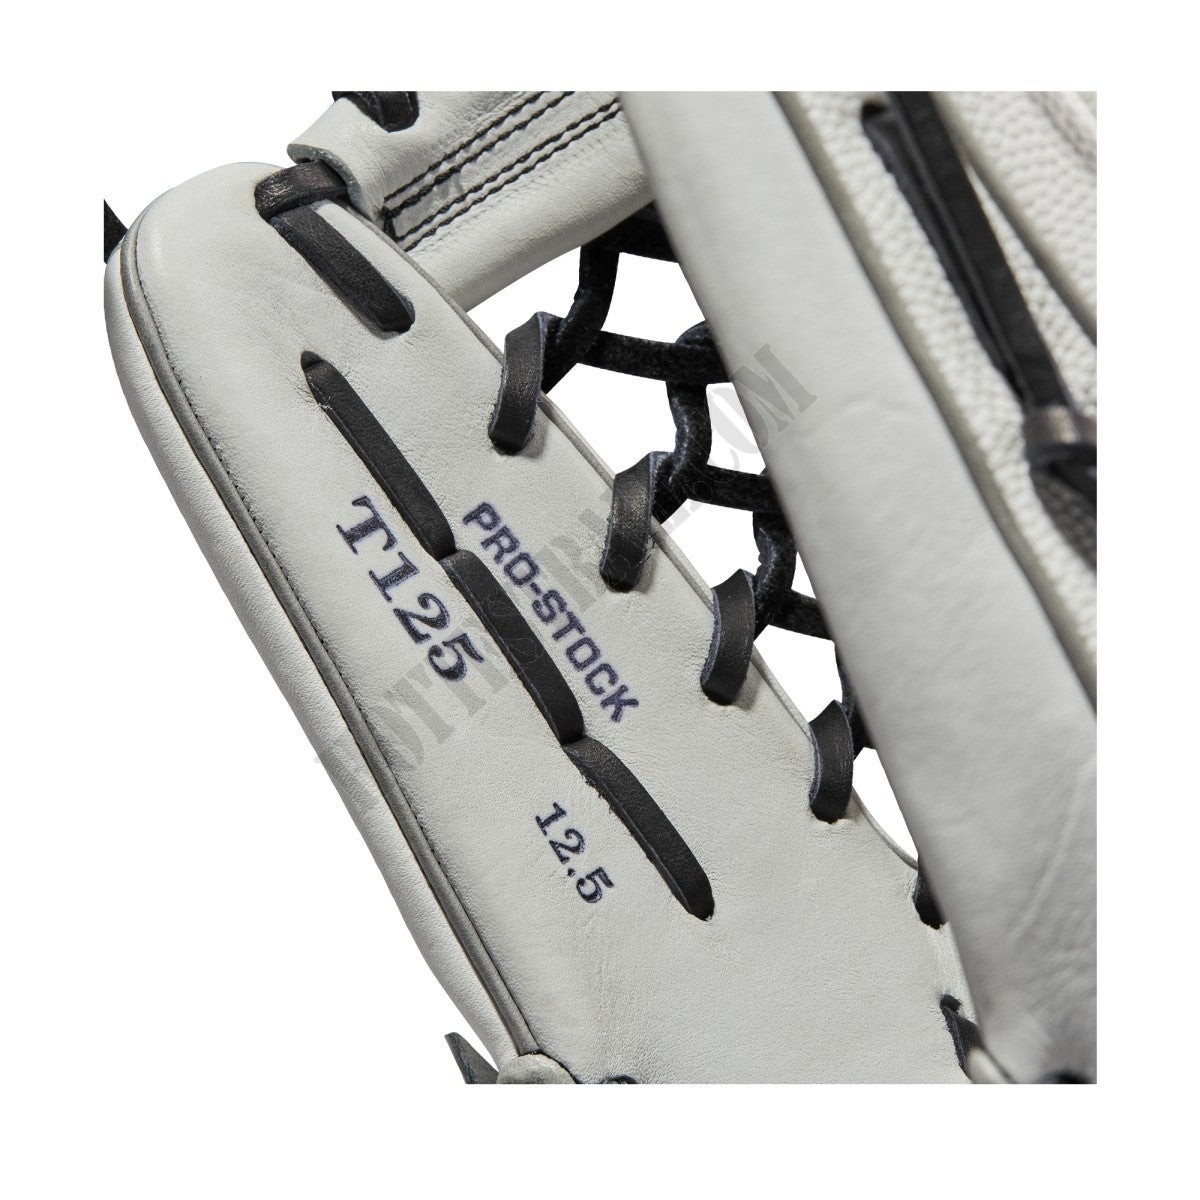 2019 A2000 T125 SuperSkin 12.5" Outfield Fastpitch Glove ● Wilson Promotions - -7